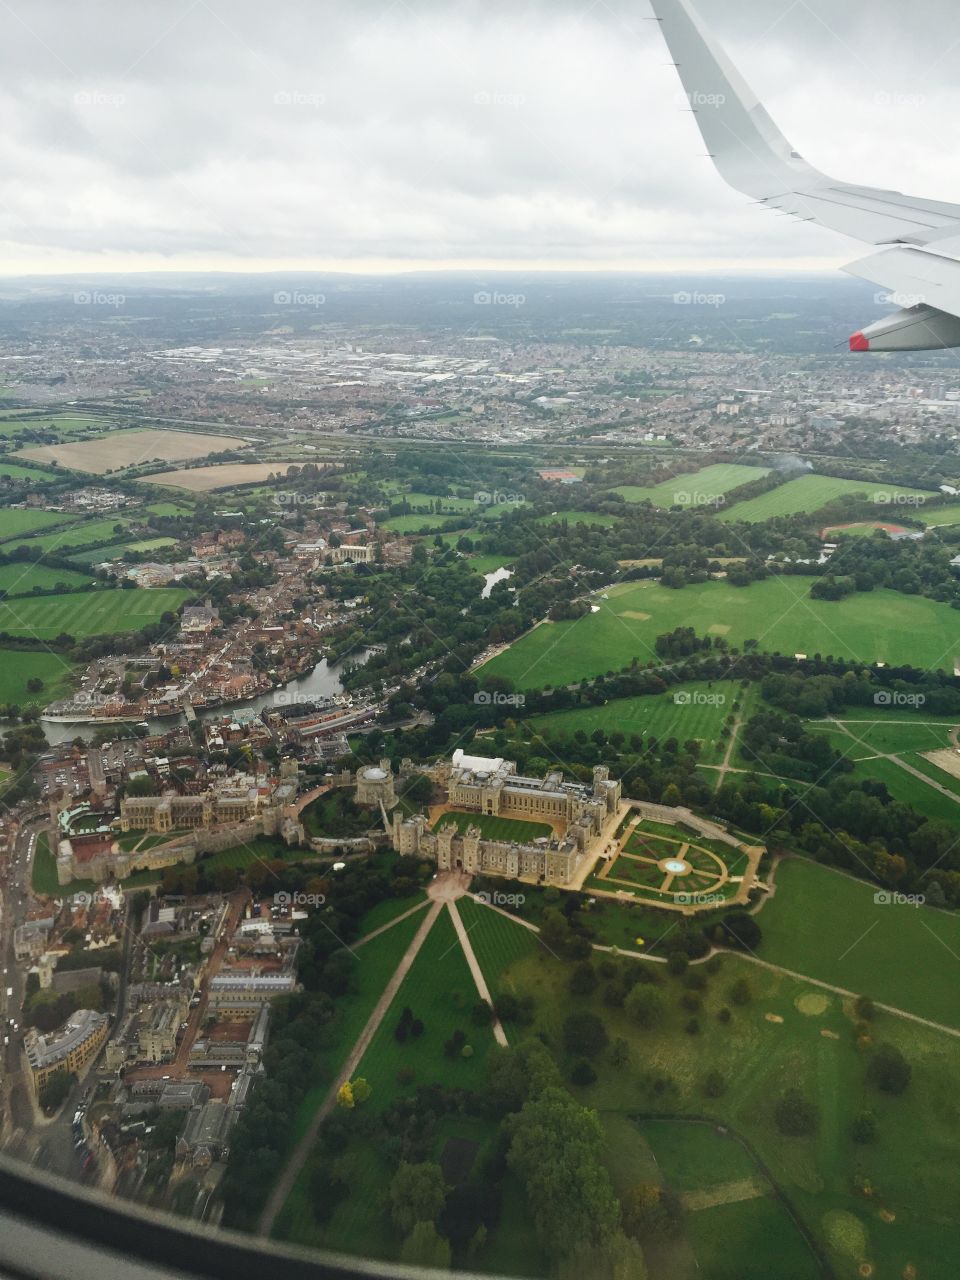 A view of London from the plane